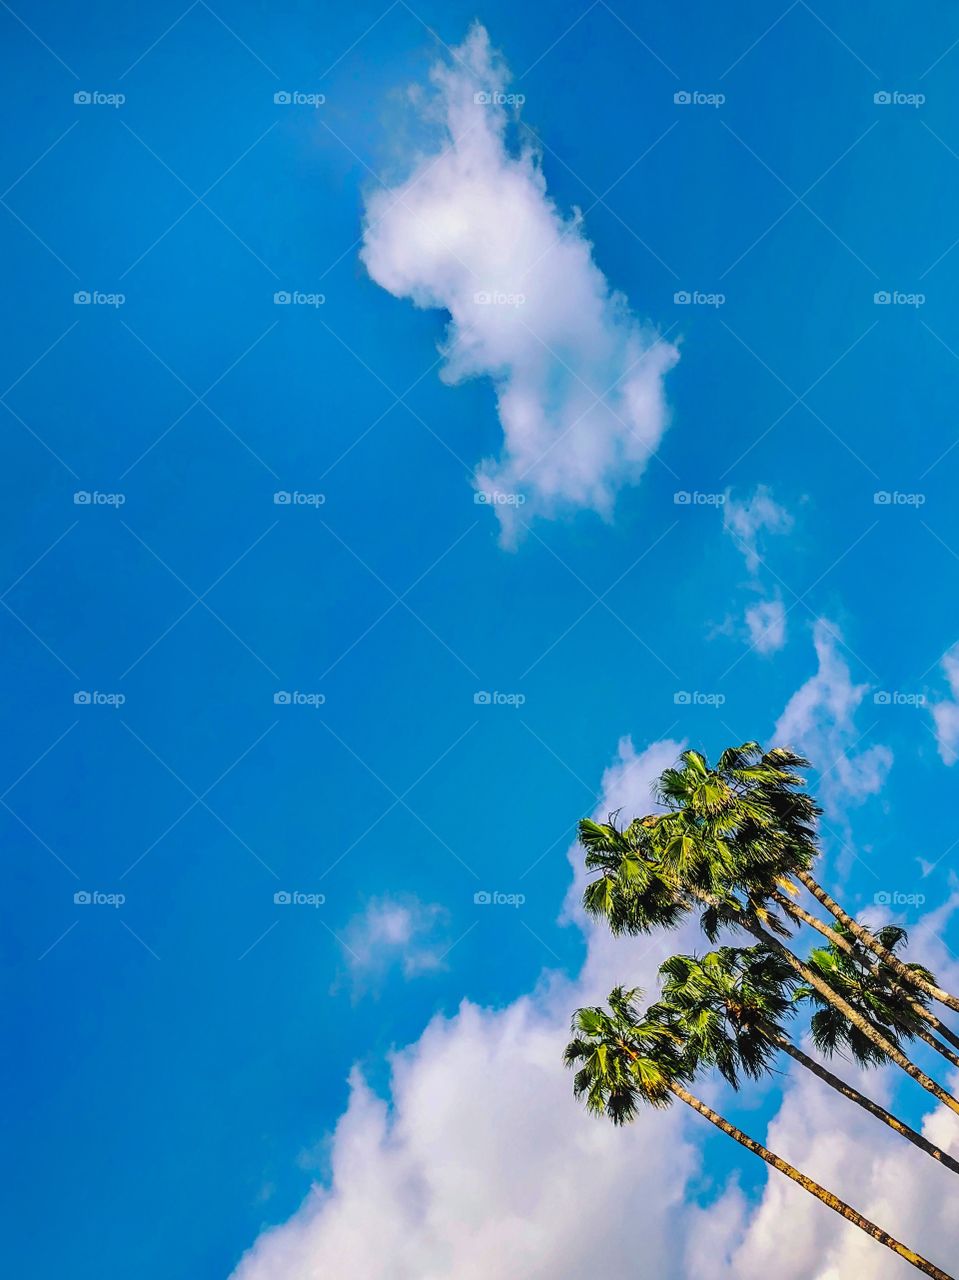 Palm trees and a blue sky in Southern California 